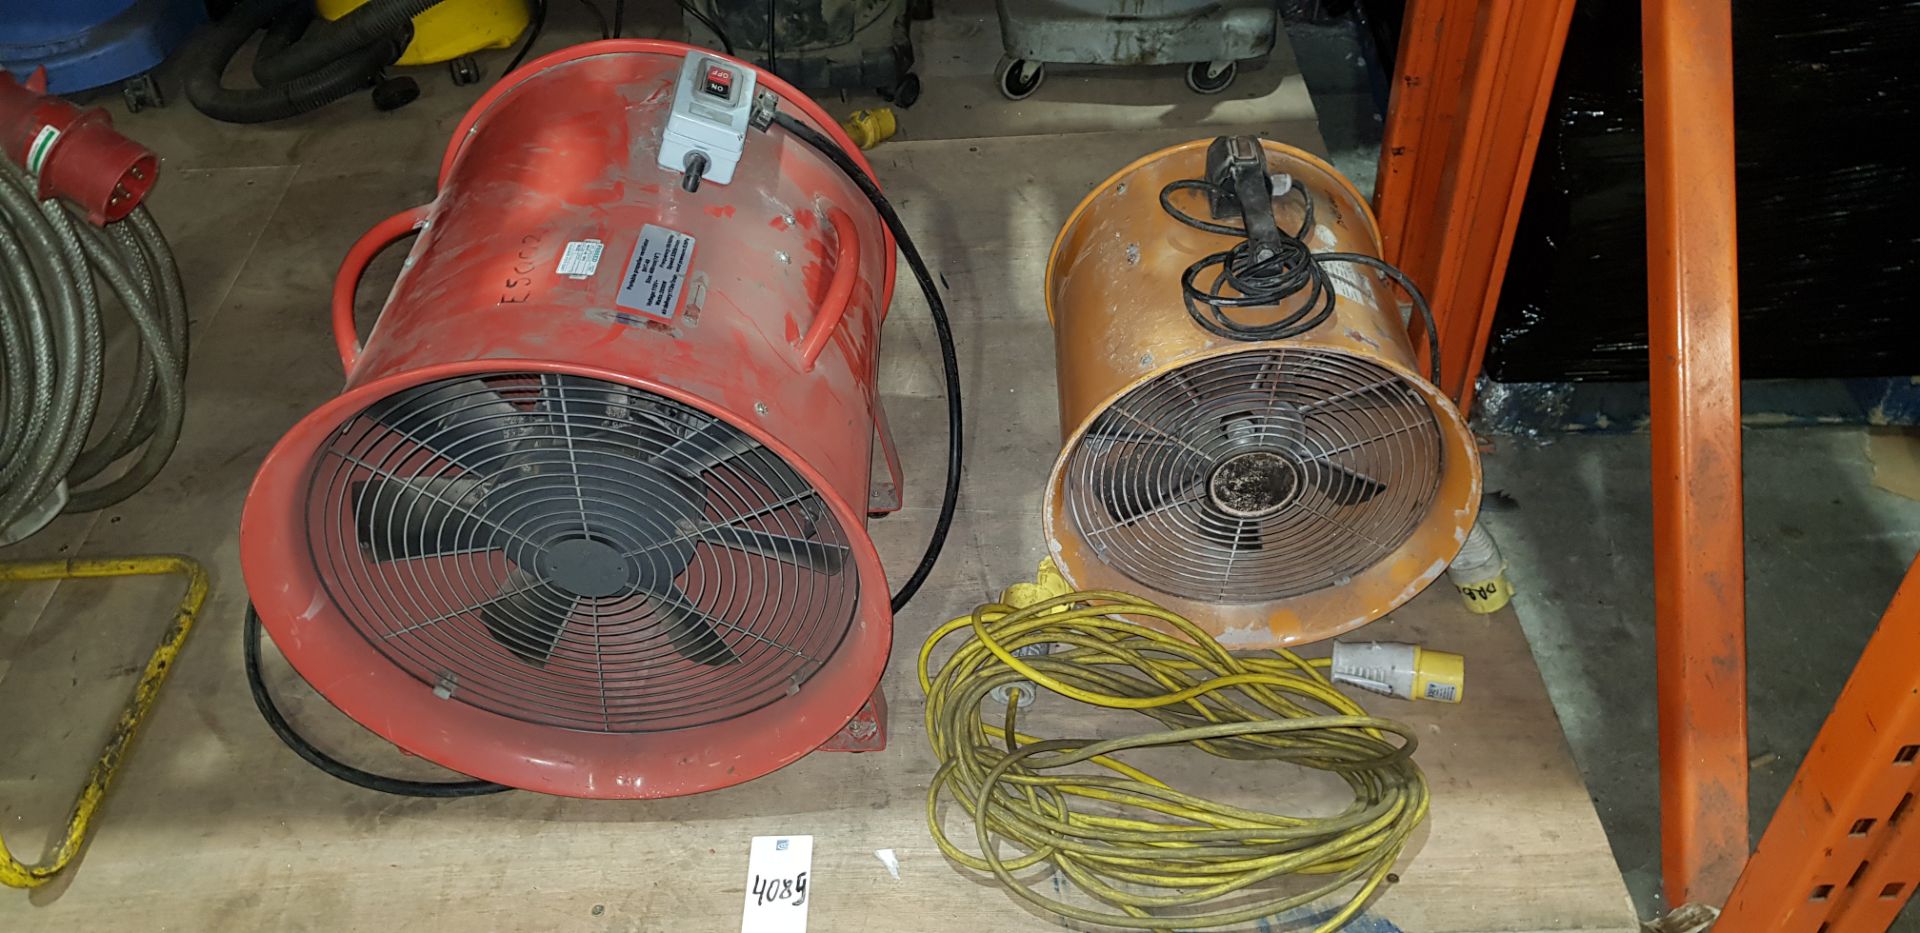 2 X VENTILATION FANS 1X CYCLONE 1X UNBRANDED BOTH 110V - WITH 110V EXTENSION LEAD